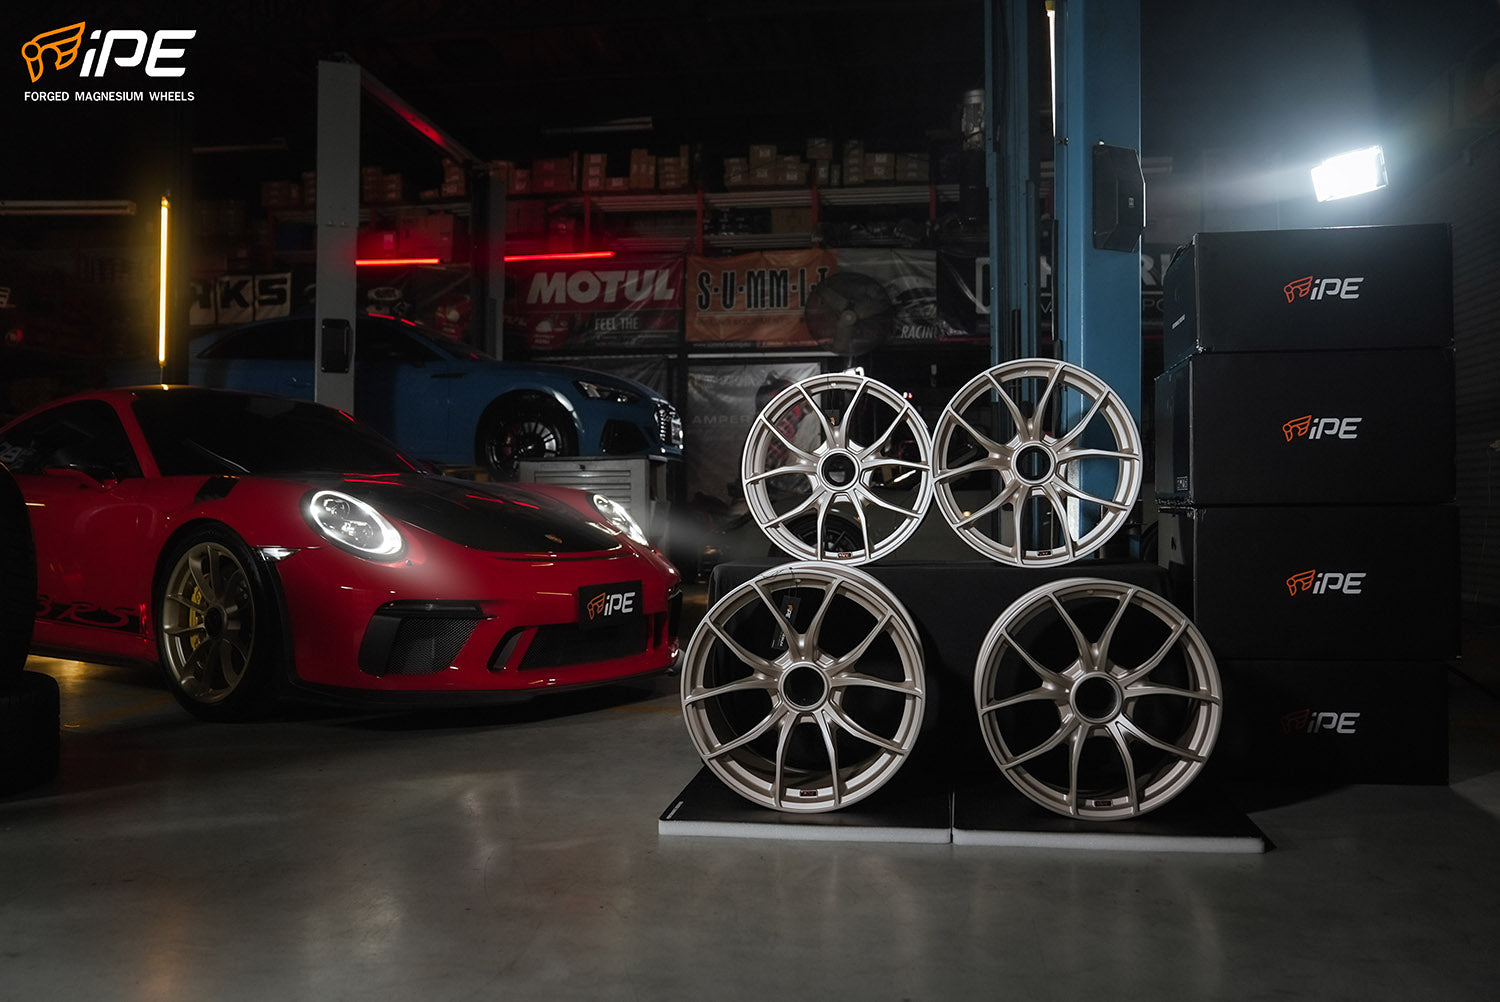 The photo depicts a dynamic automotive scene inside a well-lit garage. On the right, a stack of high-end, silver IPE wheel rims with intricate multi-spoke designs is showcased on a black display with the iPE logo. In the background, a vibrant red Porsche with black details sits prominently. The garage itself is lined with automotive parts and branding. The overall composition combines the allure of advanced auto parts with the prestige of sports car culture.